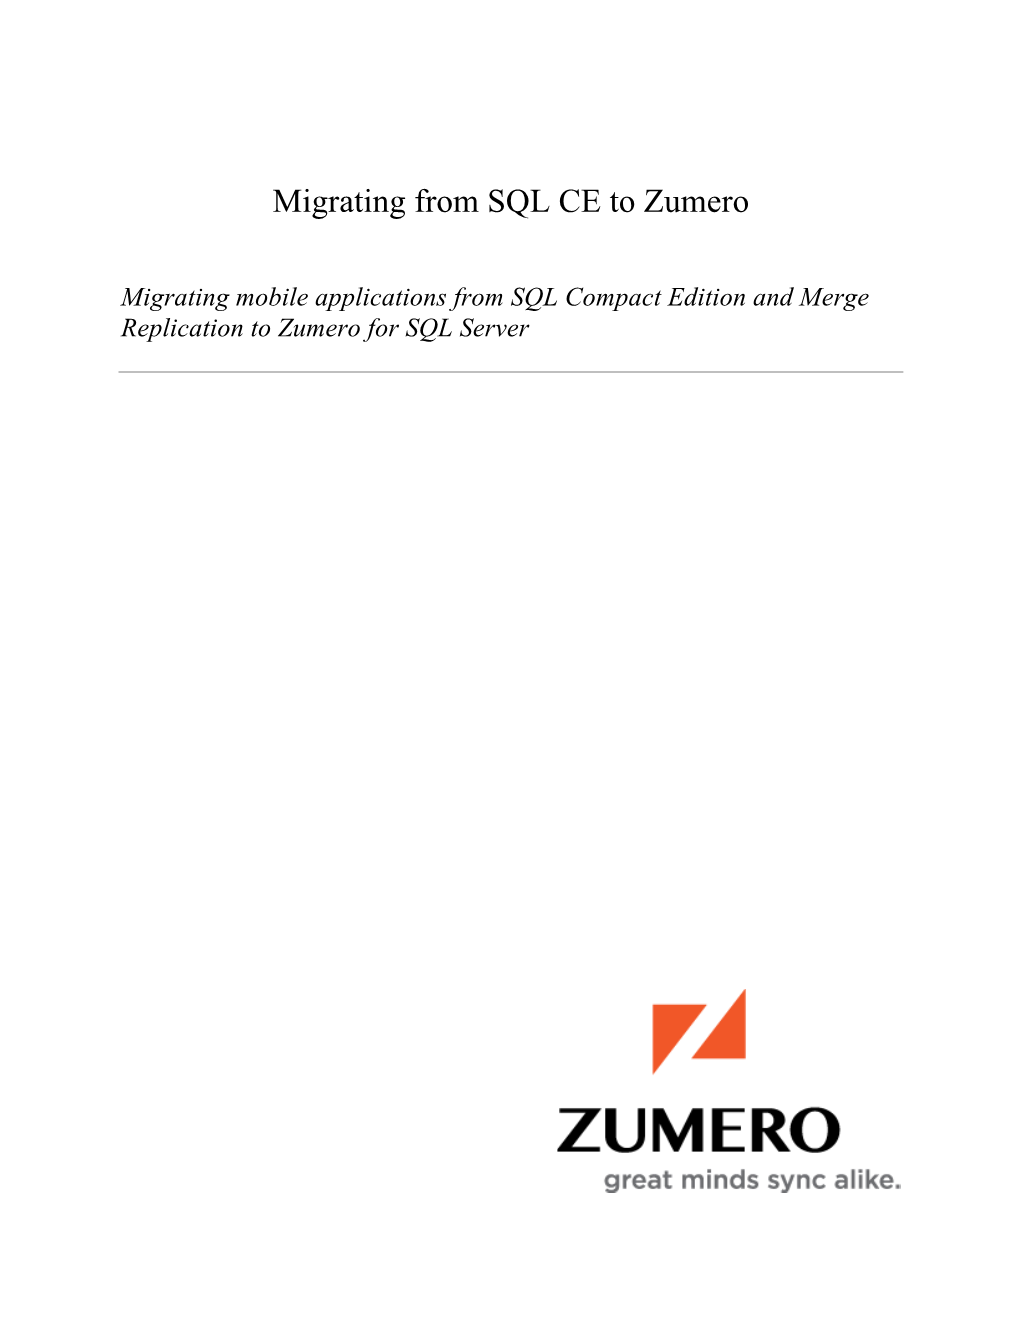 Migrating from SQL CE to Zumero